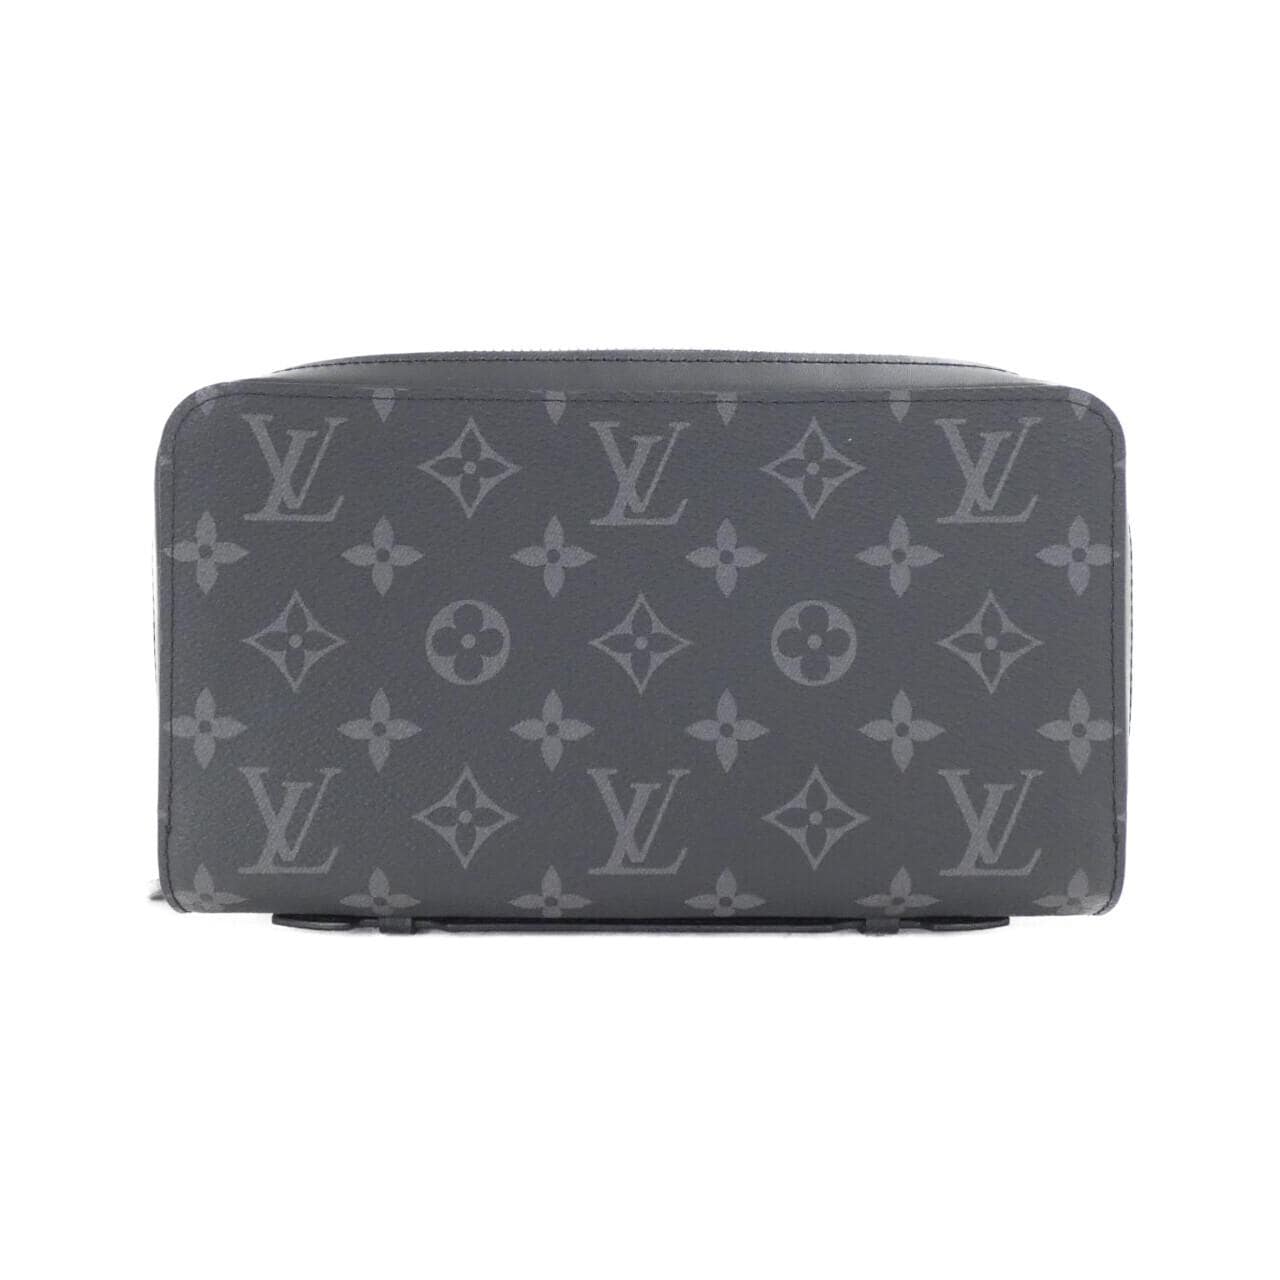 【LOUIS VUITTON】ルイヴィトン ジッピーXL 財布 モノグラム・エクリプス M61698 CA4290/kt06274tm